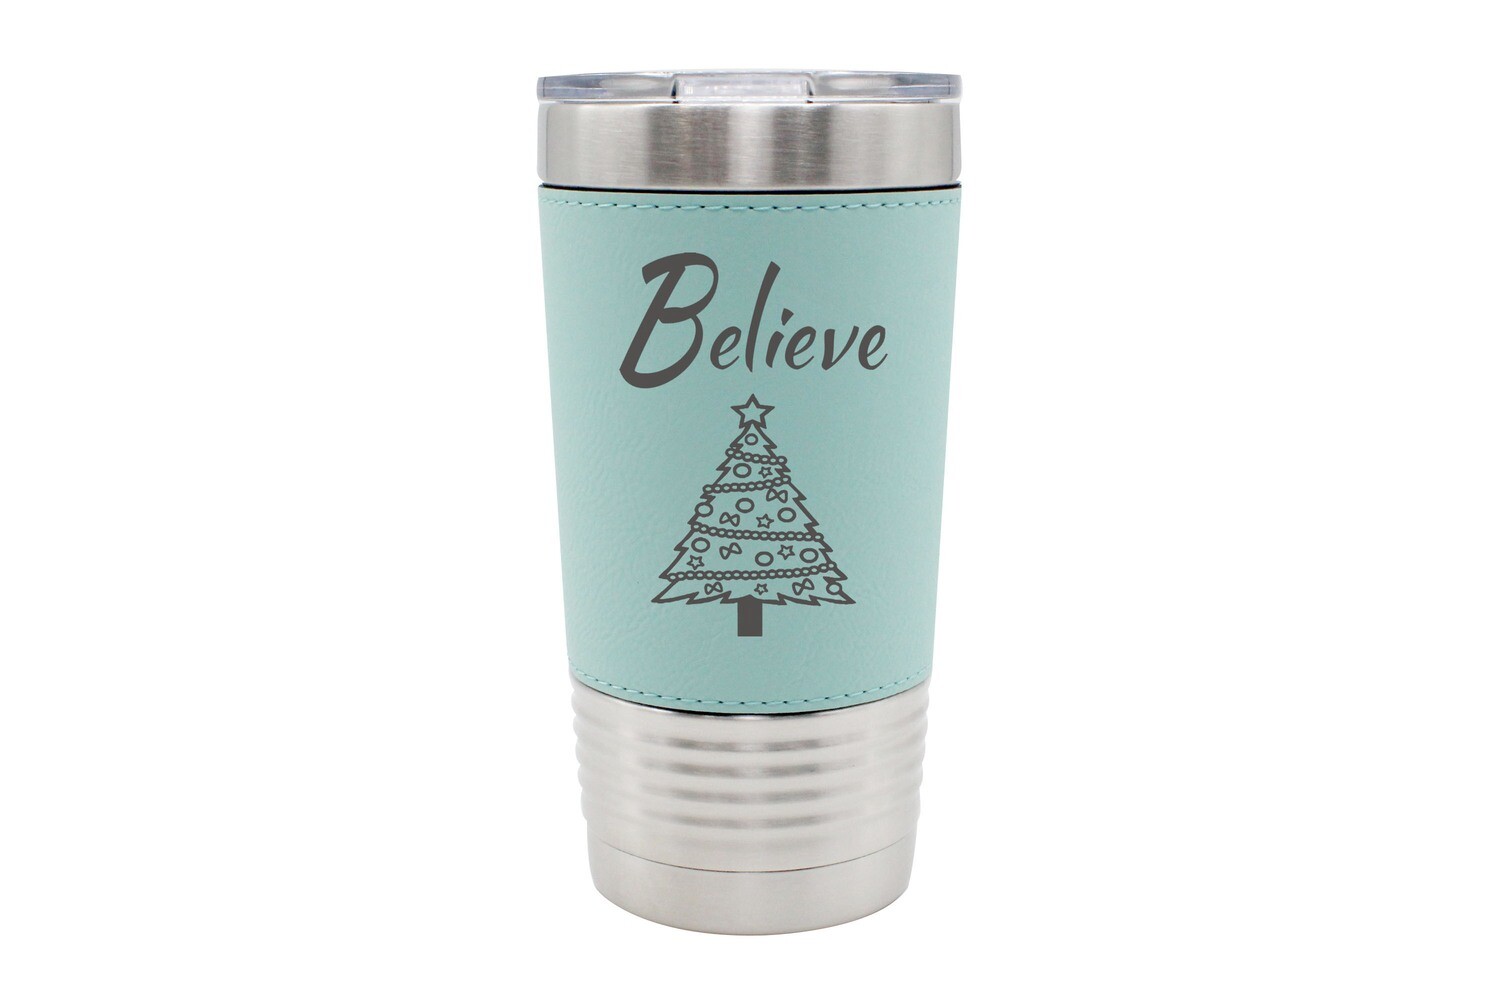 Leatherette 20 oz Believe Insulated Tumbler